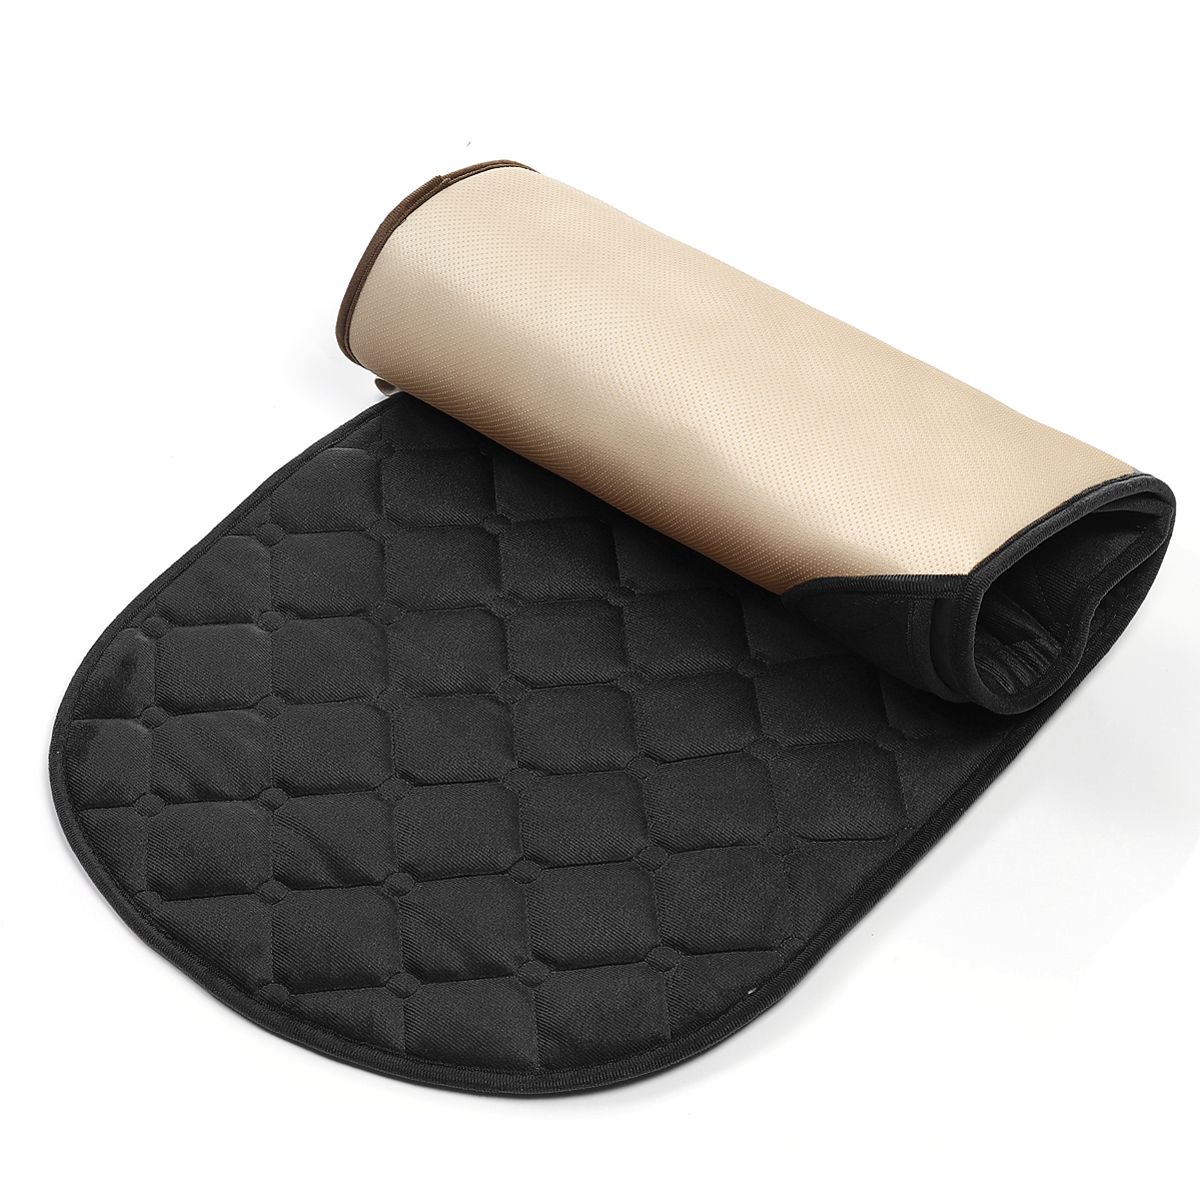 Car-Heating-Seat-Cushion-Cover-Front--Rear-Row-Car-Pad-Mat-Winter-Home-Office-Warm-1614551